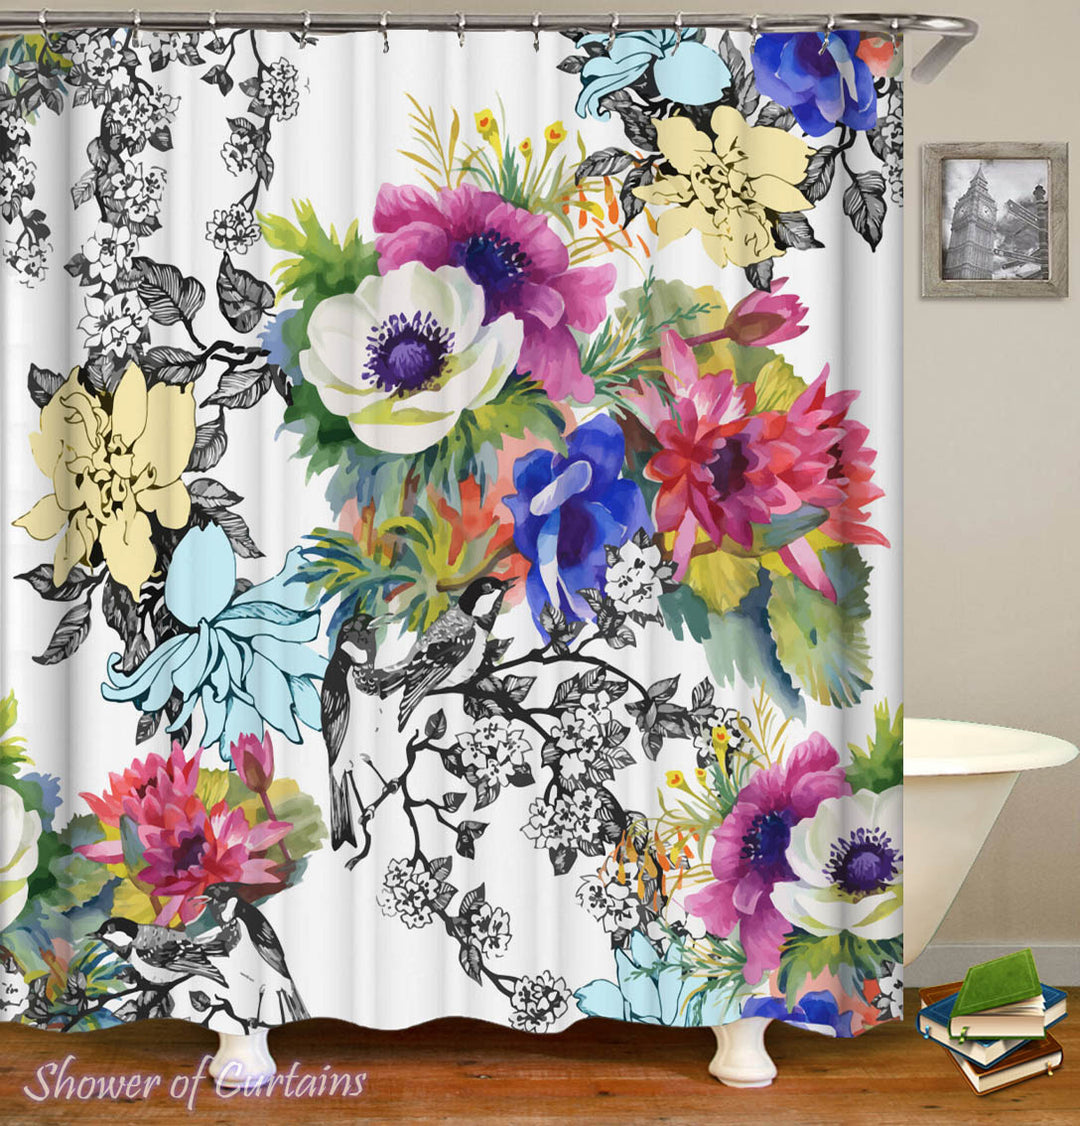 Floral Shower Curtain - Black and White Colorful